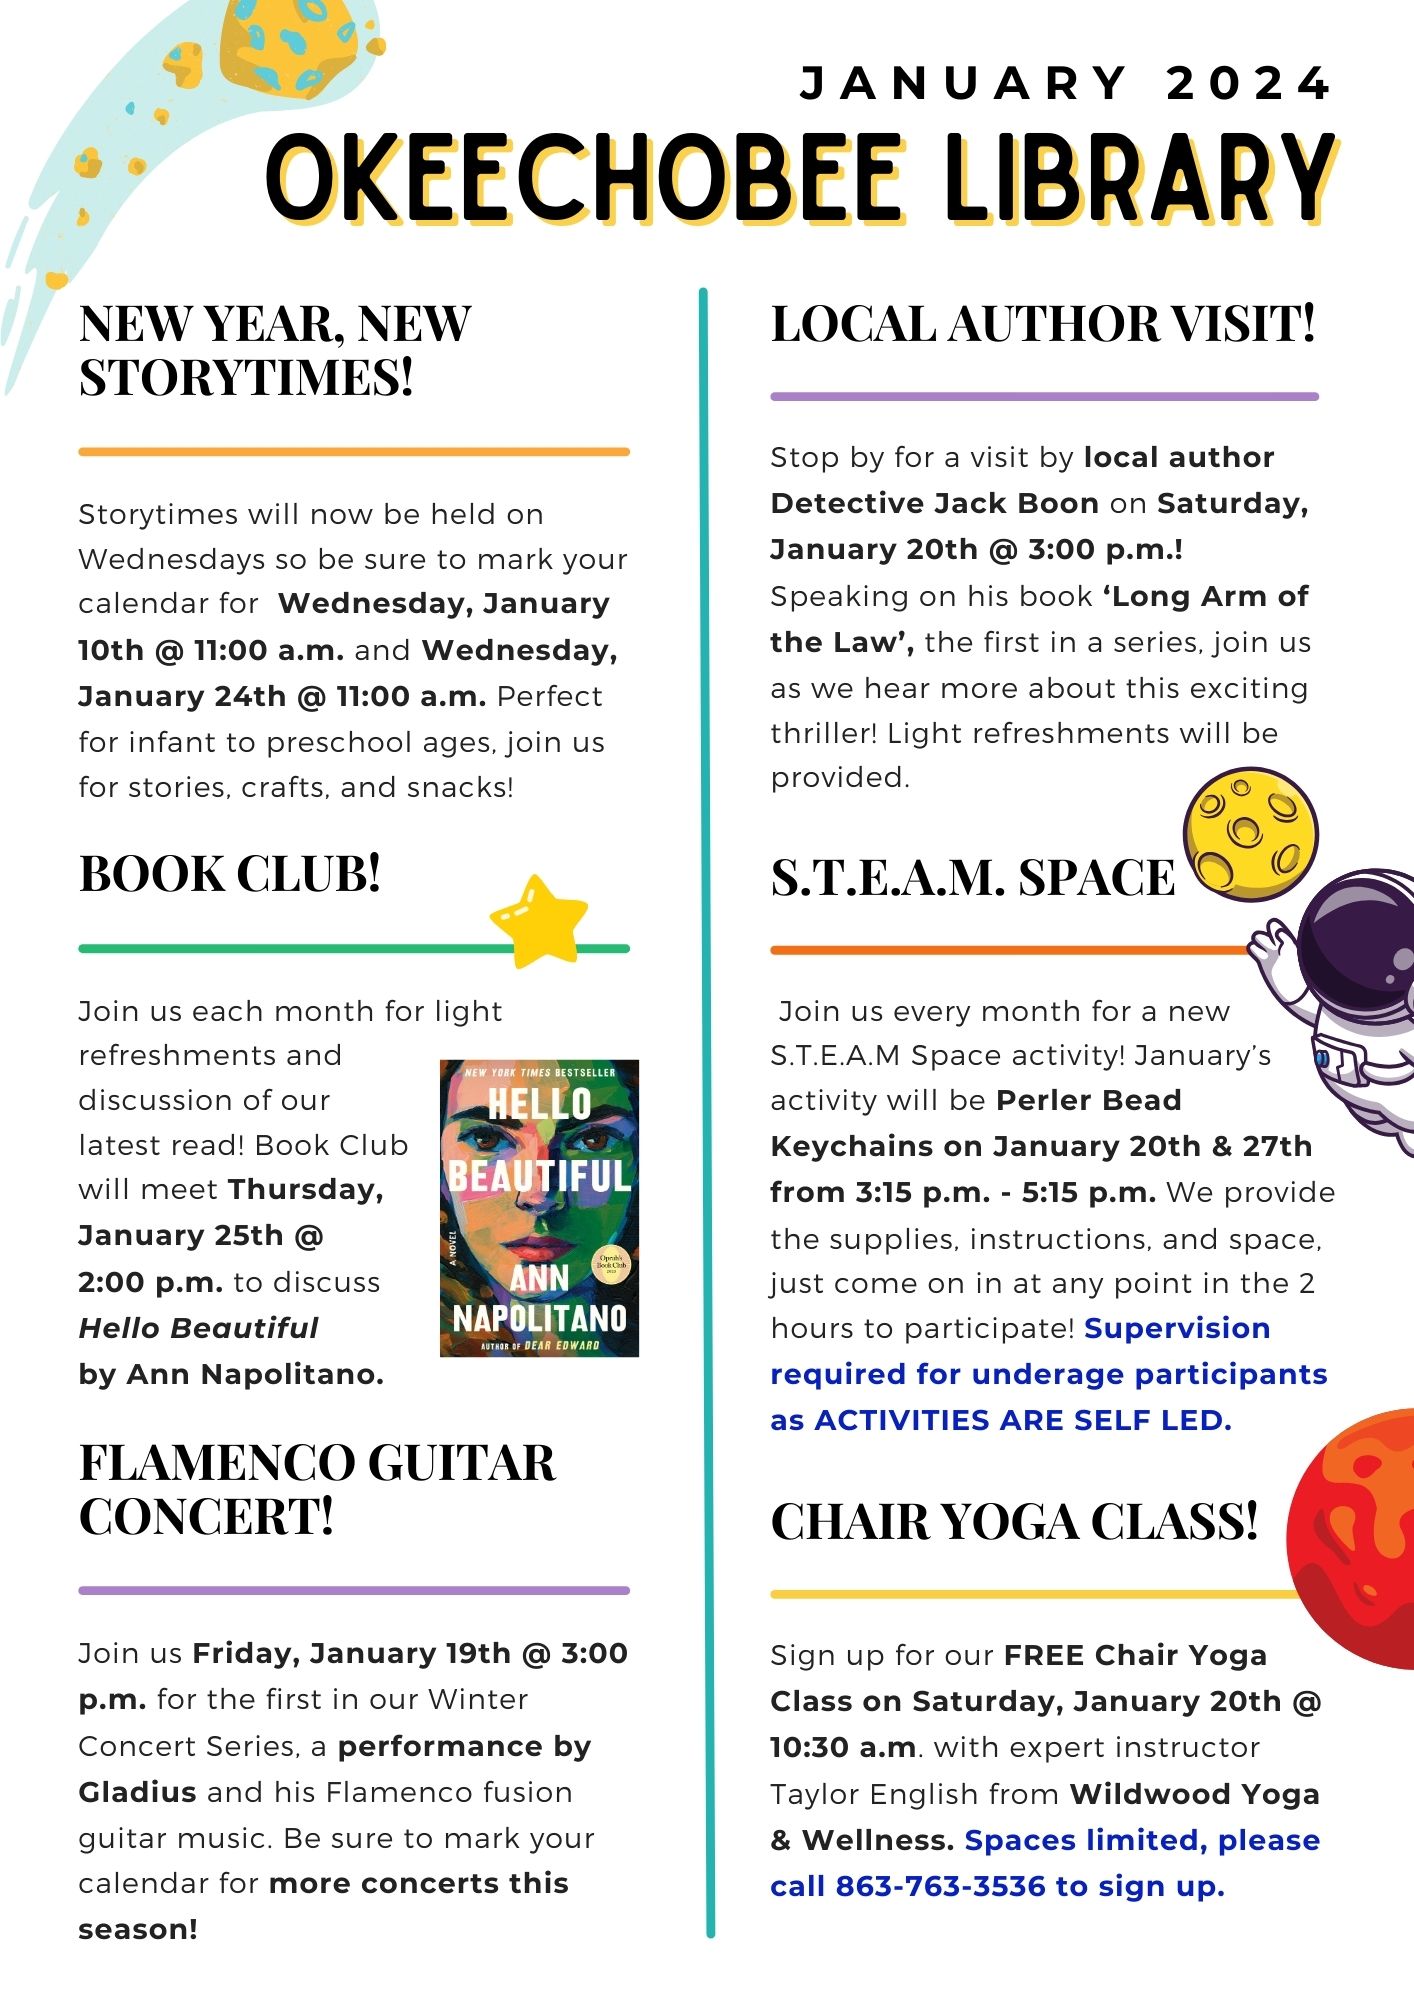 Okeechobee December 2023 Newsletter - Click on the image for the downloadable PDF version of the newsletter